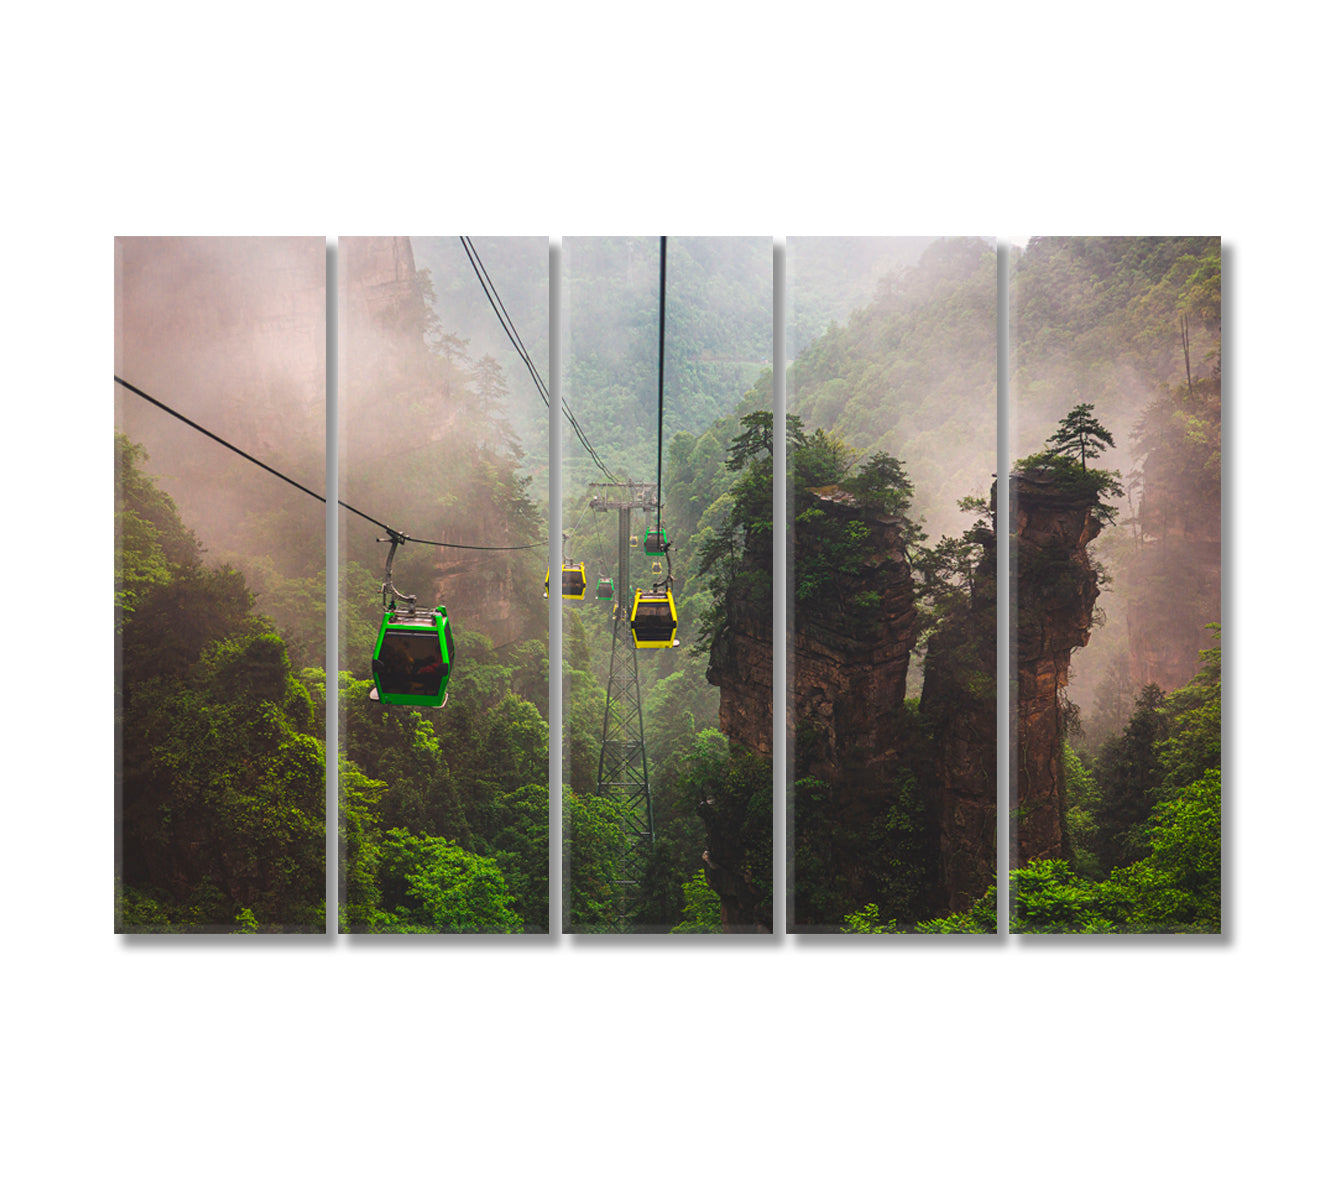 Zhangjiajie National Forest Park with Cable Car China Canvas Print-Canvas Print-CetArt-5 Panels-36x24 inches-CetArt